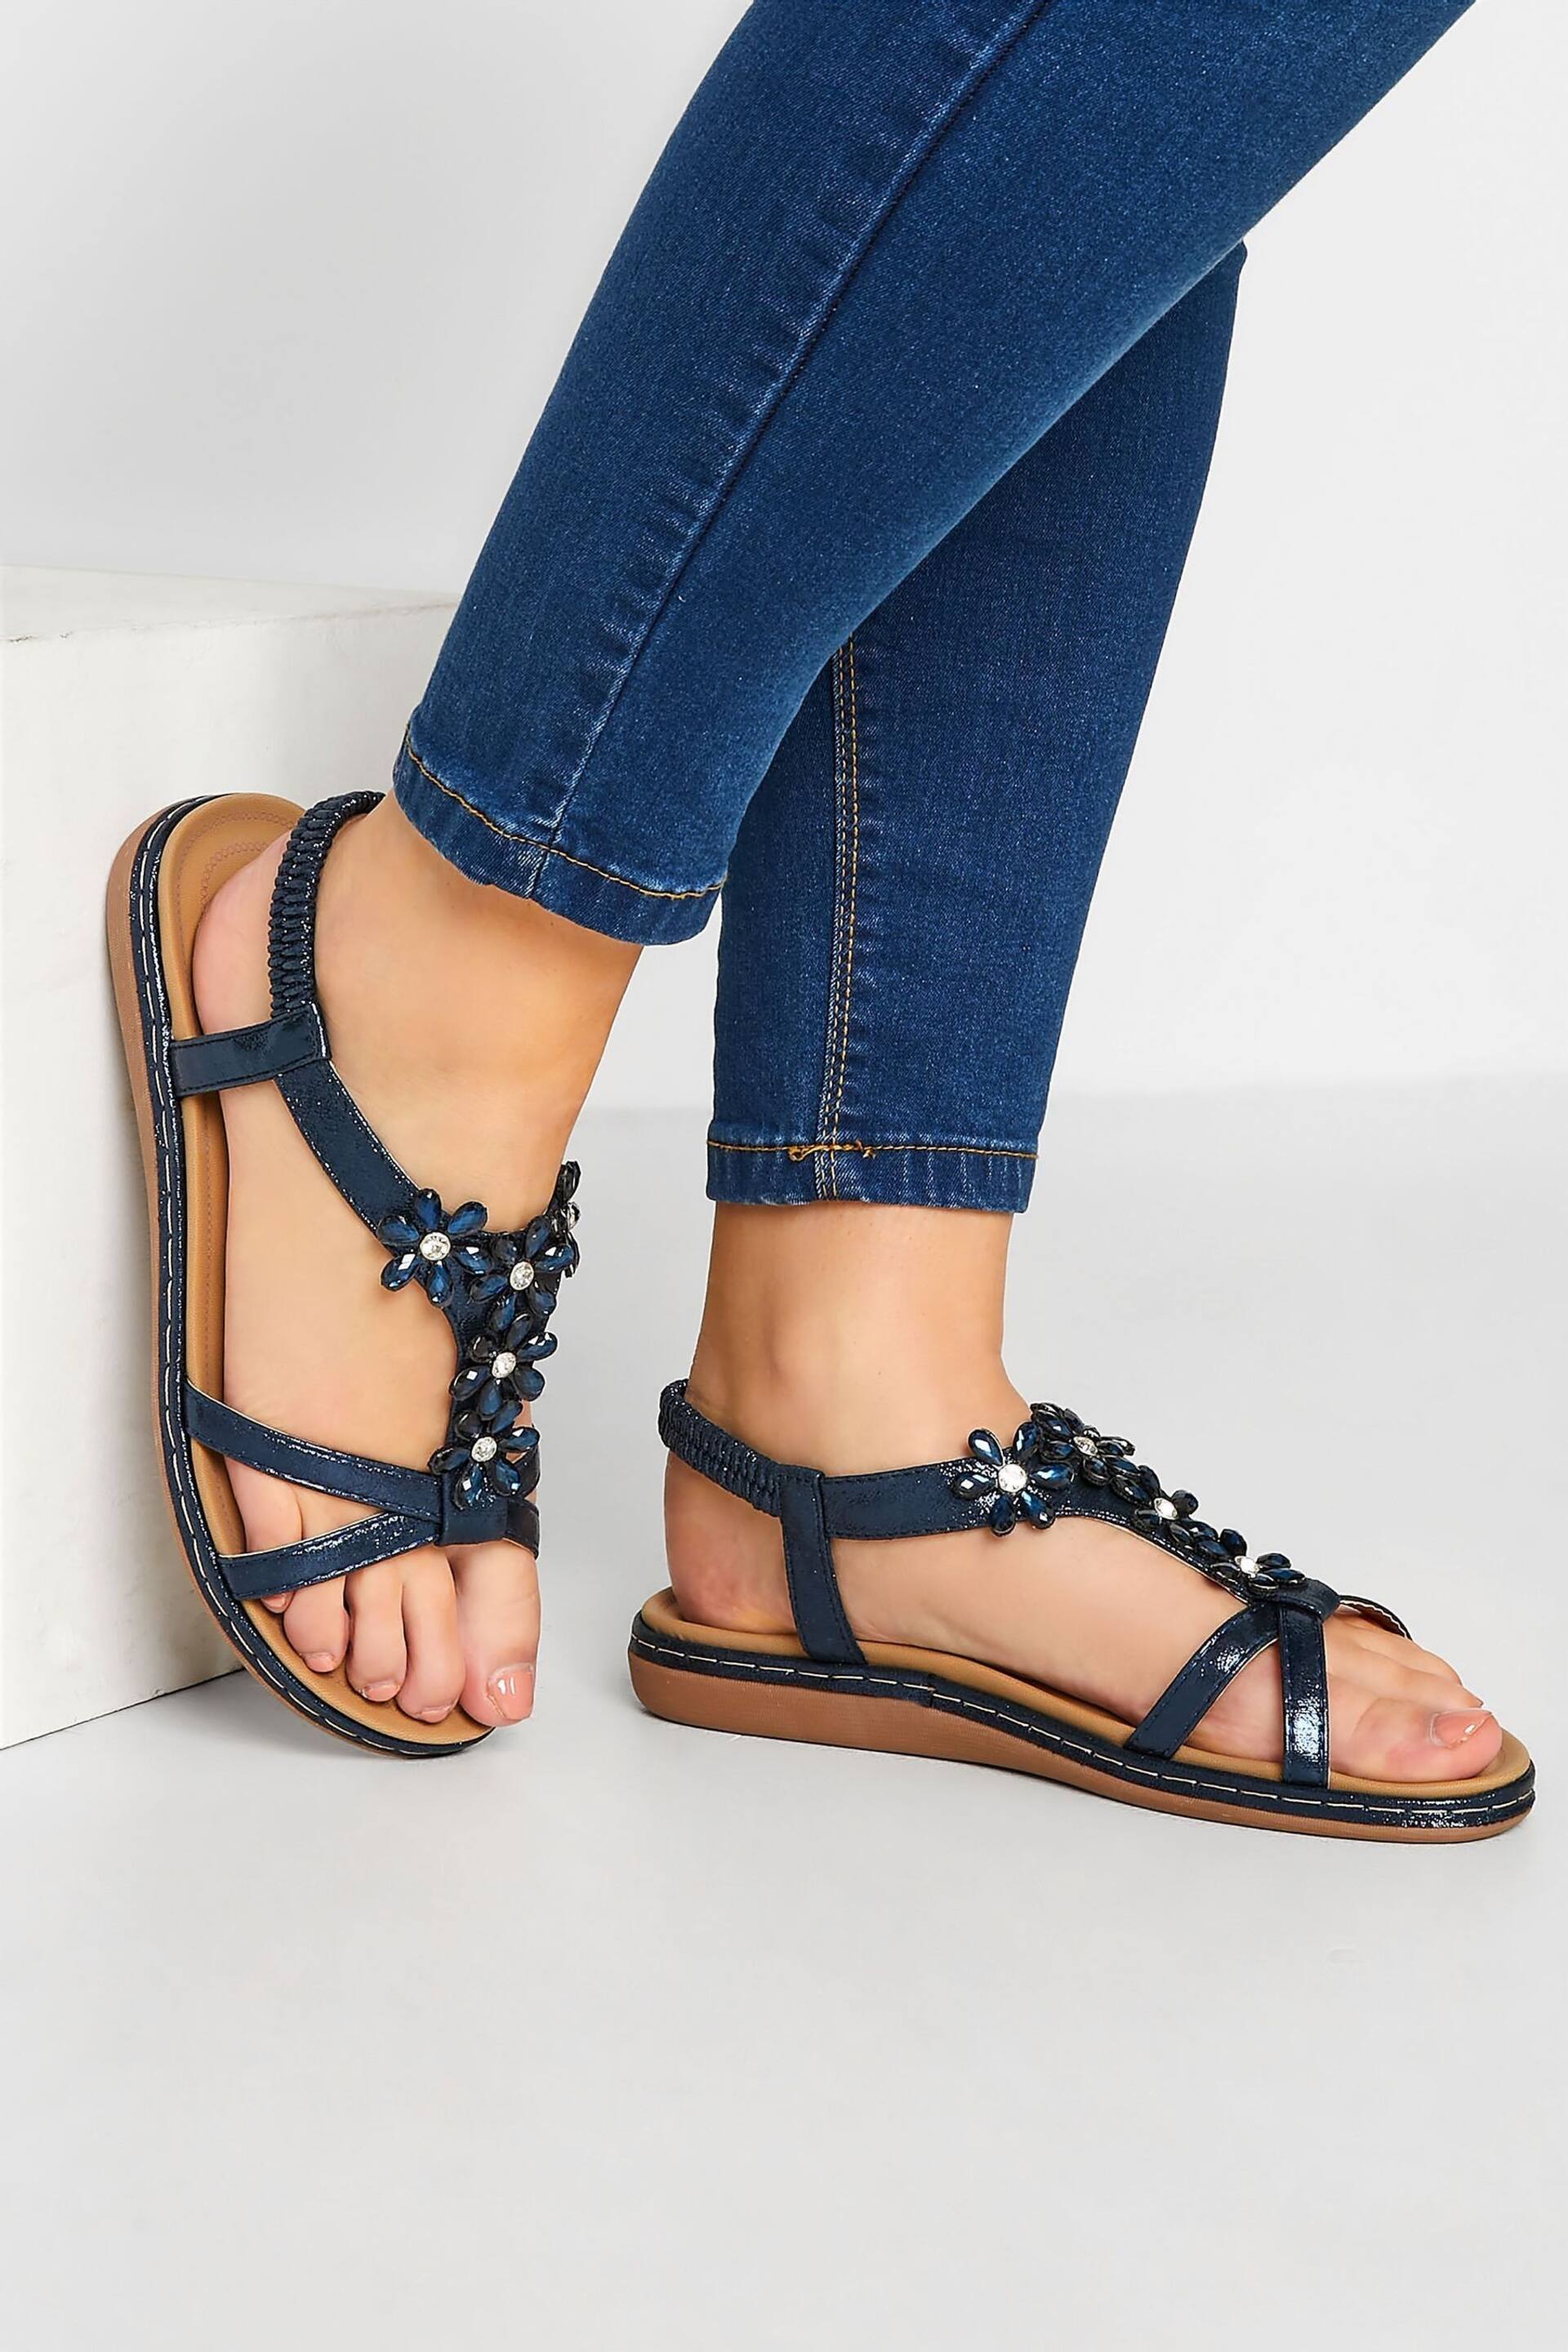 Yours Curve Blue Dark Wide Fit Wide Fit Diamante Flower Sandals - Image 1 of 5